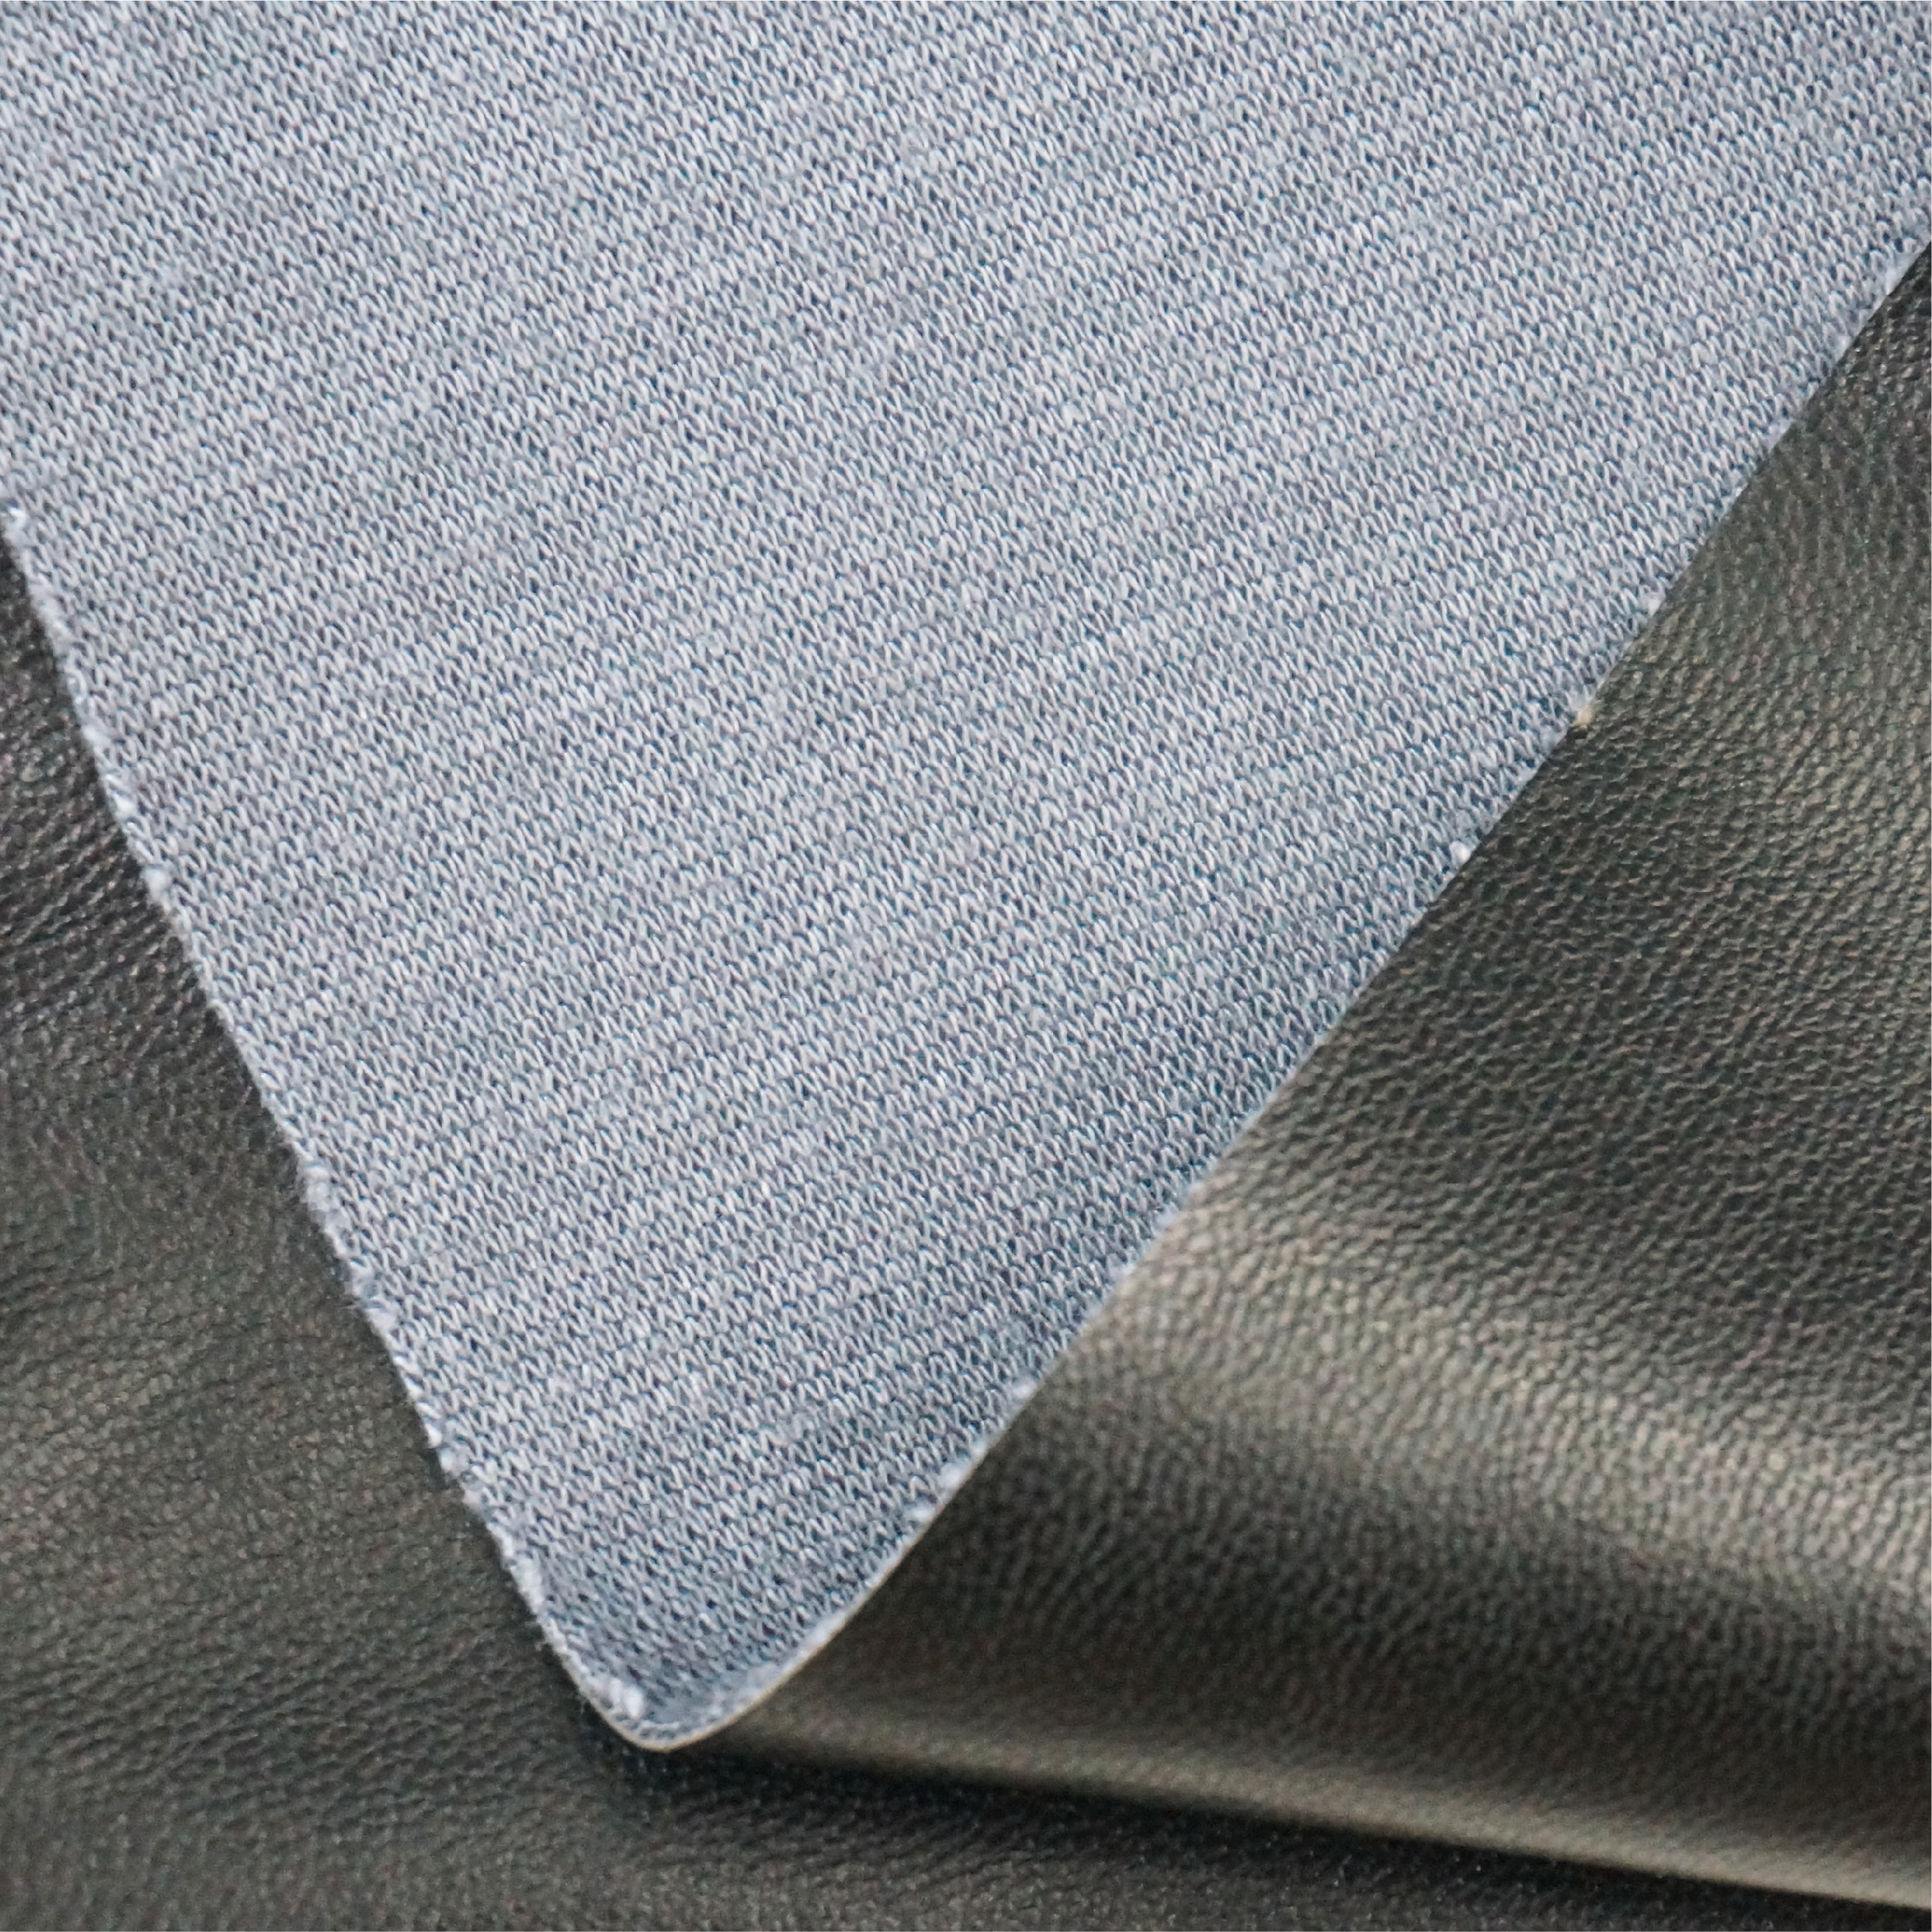 Wear Resistant 30% Polyester 70% PU Gray Leather Upholstery Fabric